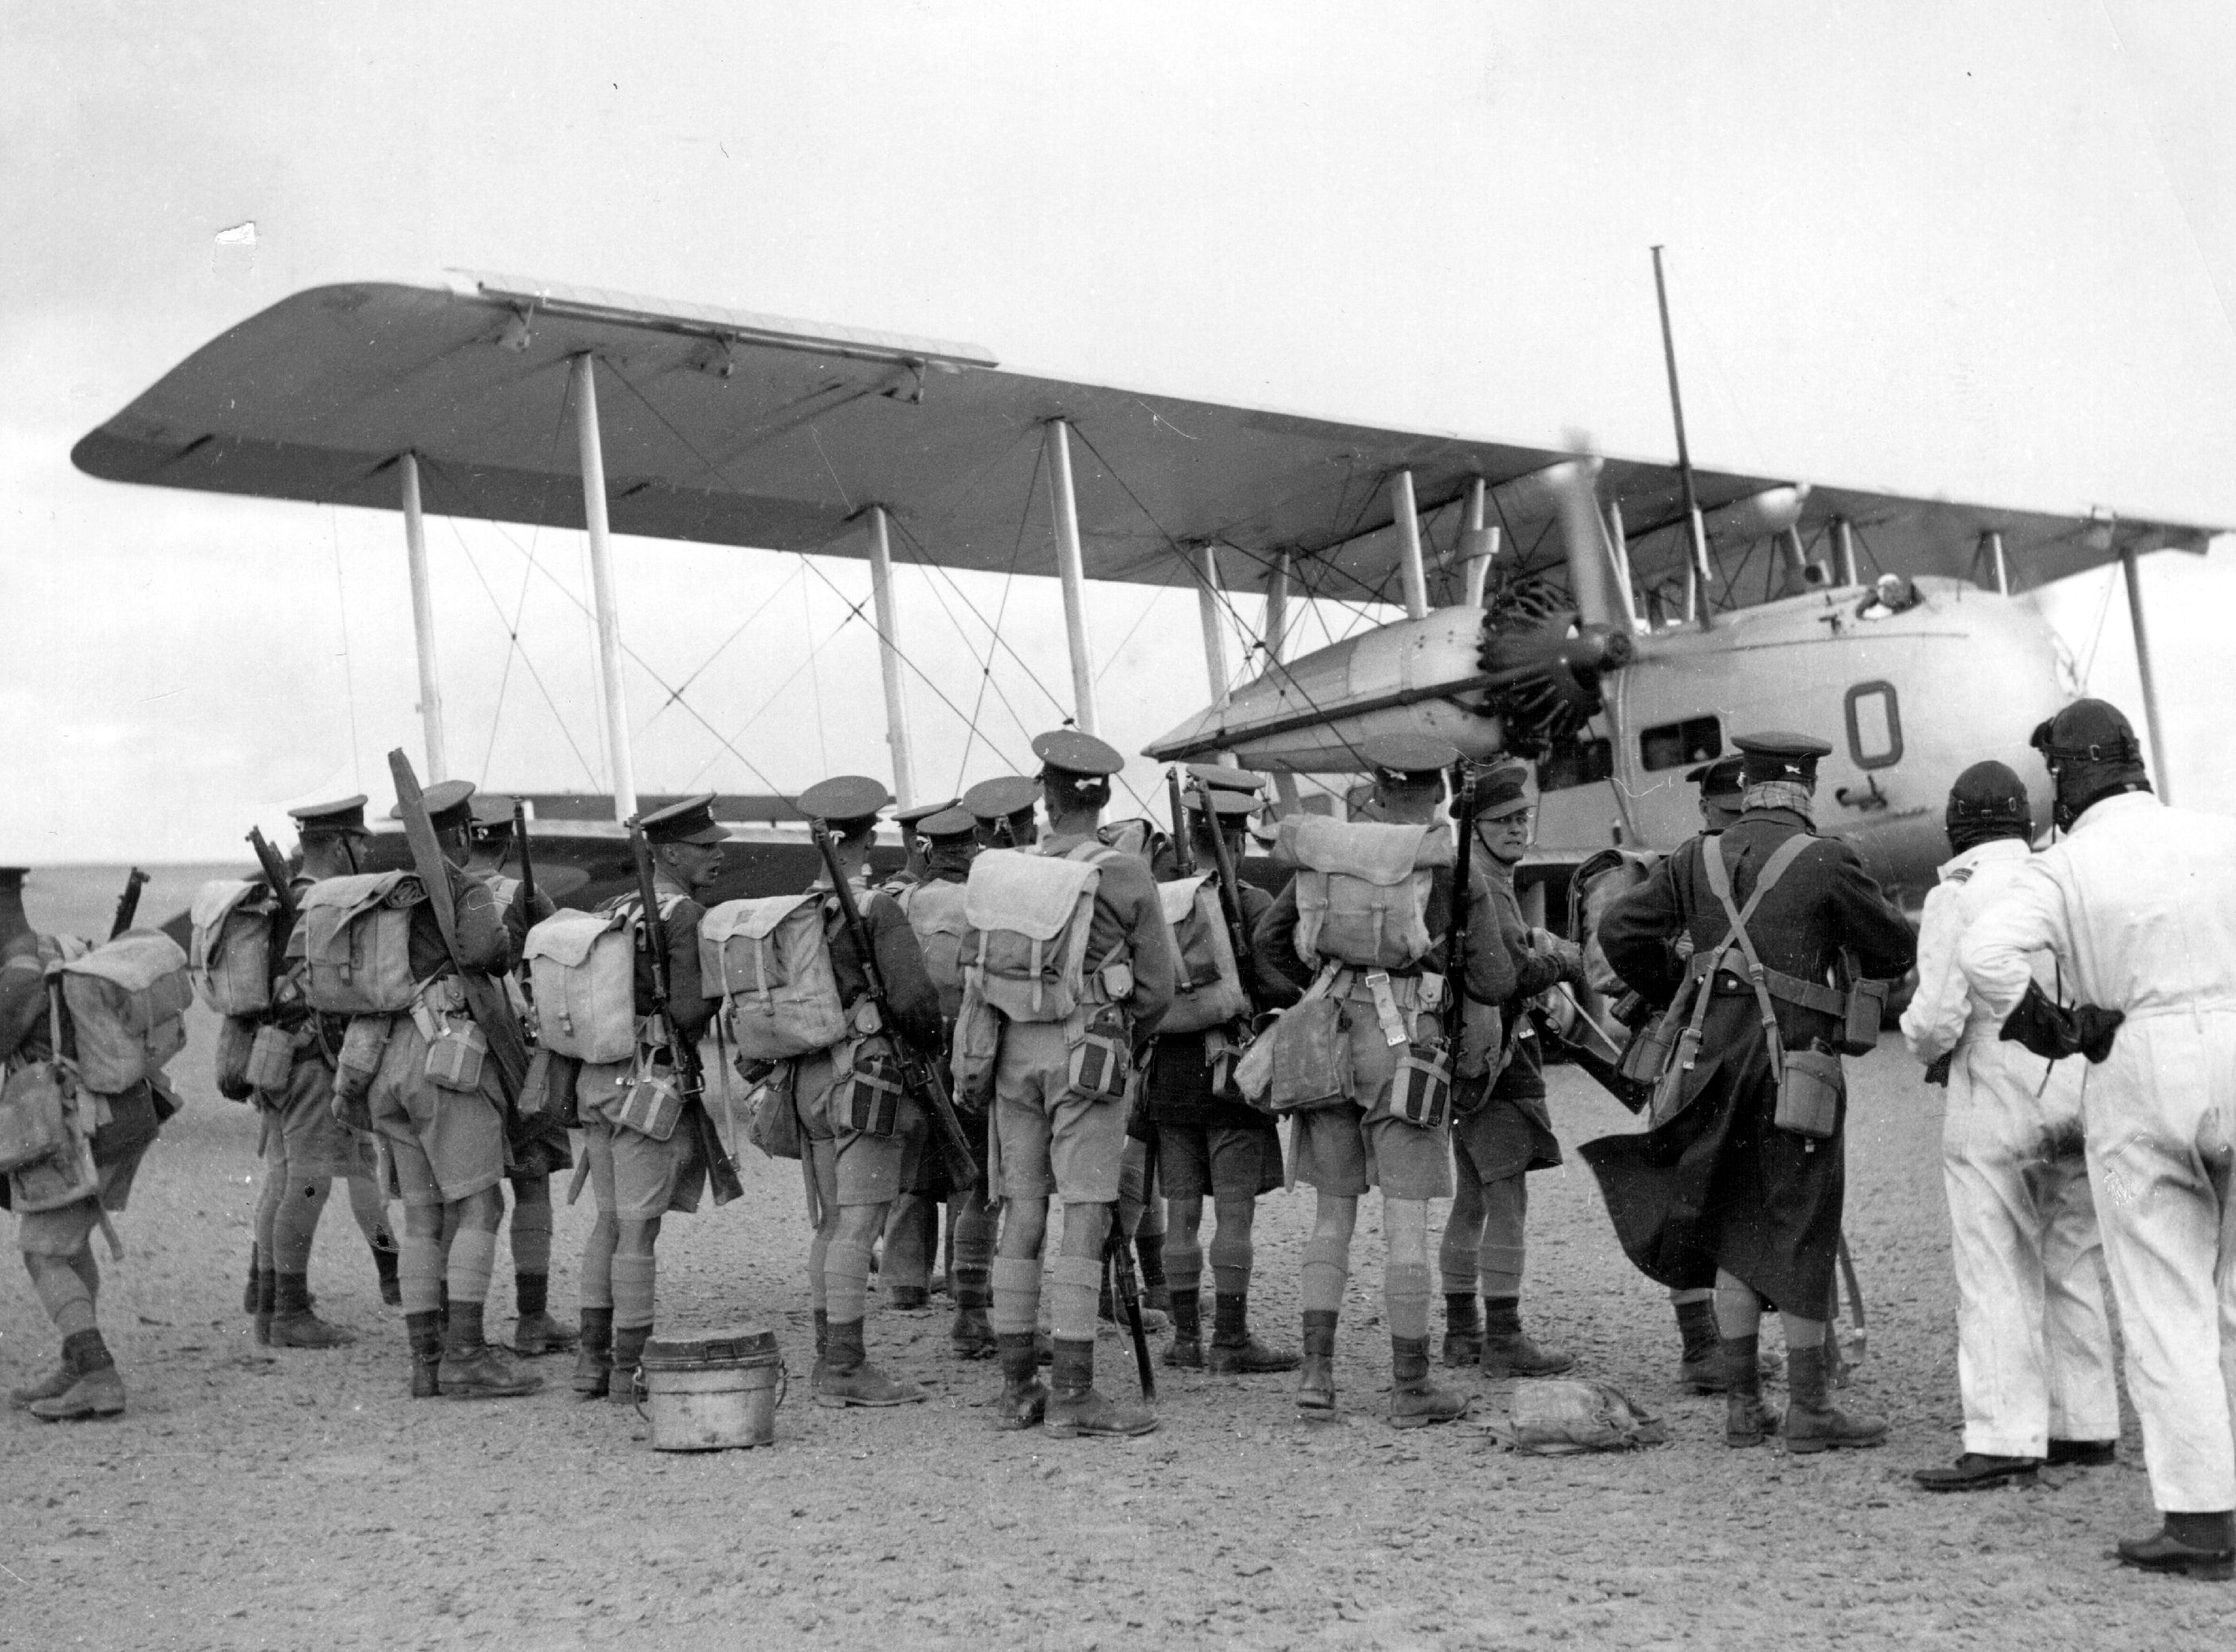 Troops in front of Vickers aircraft